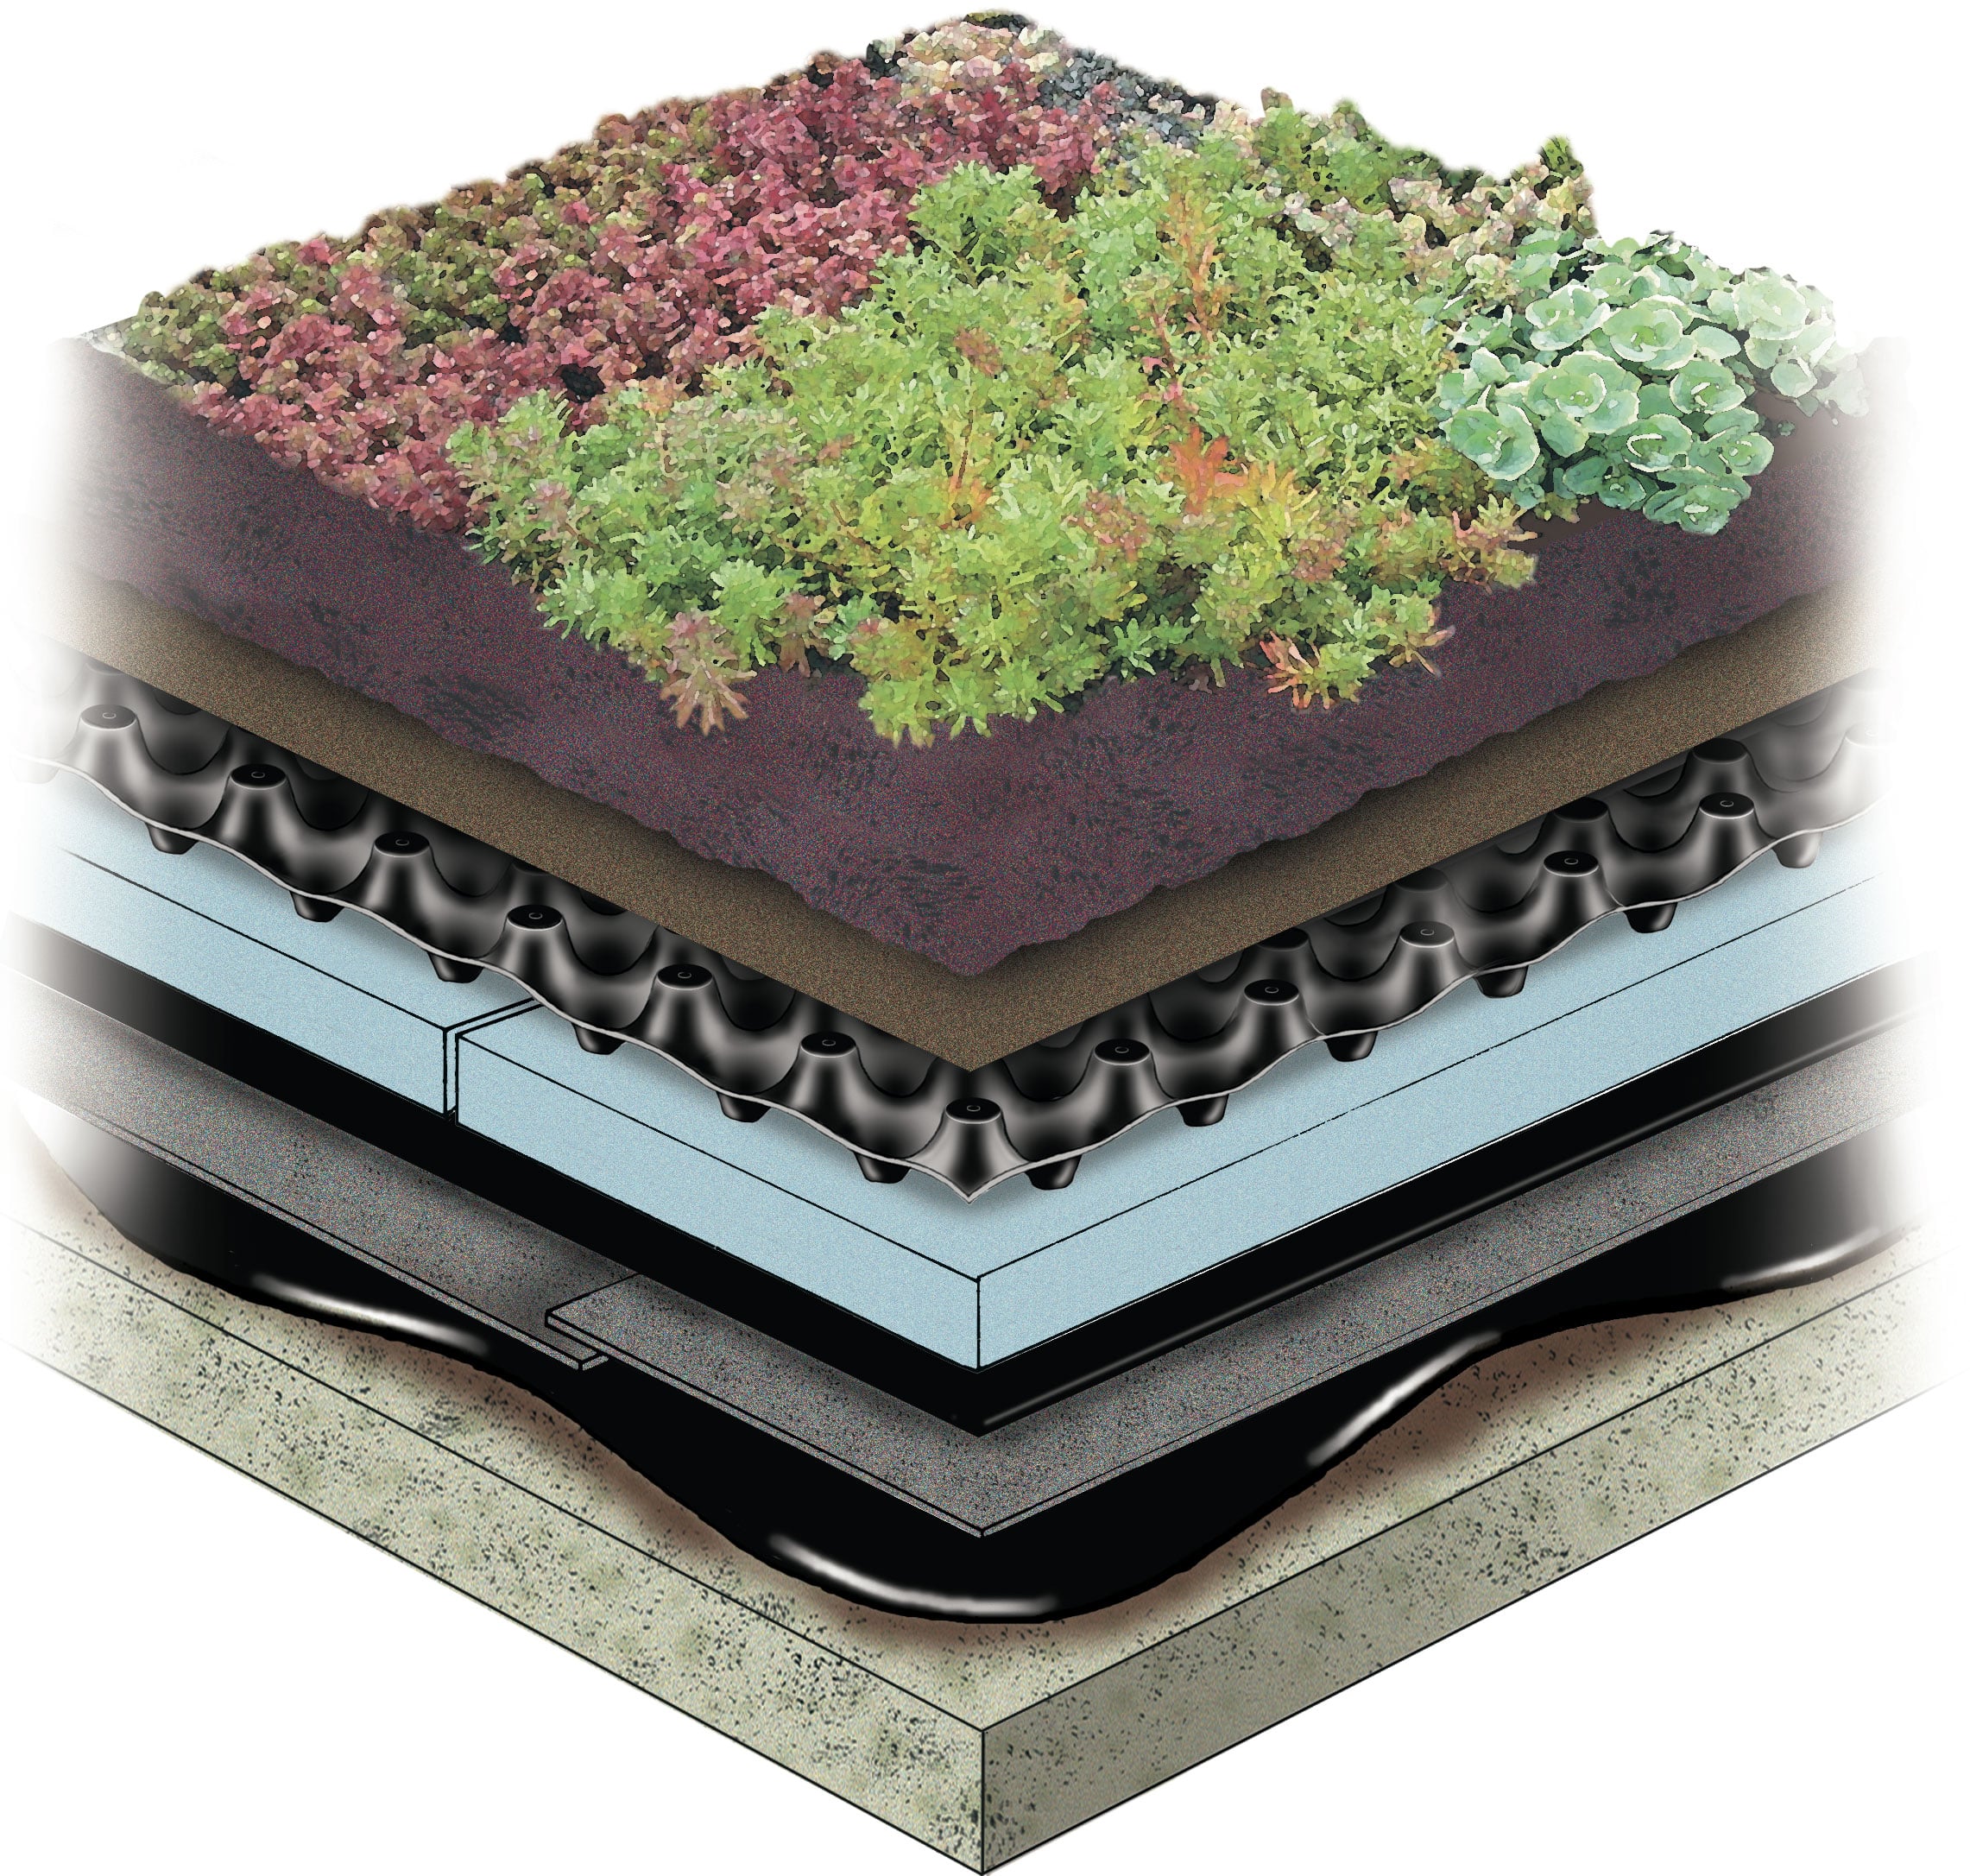 HYDROTECH'S GARDEN ROOF® ASSEMBLY